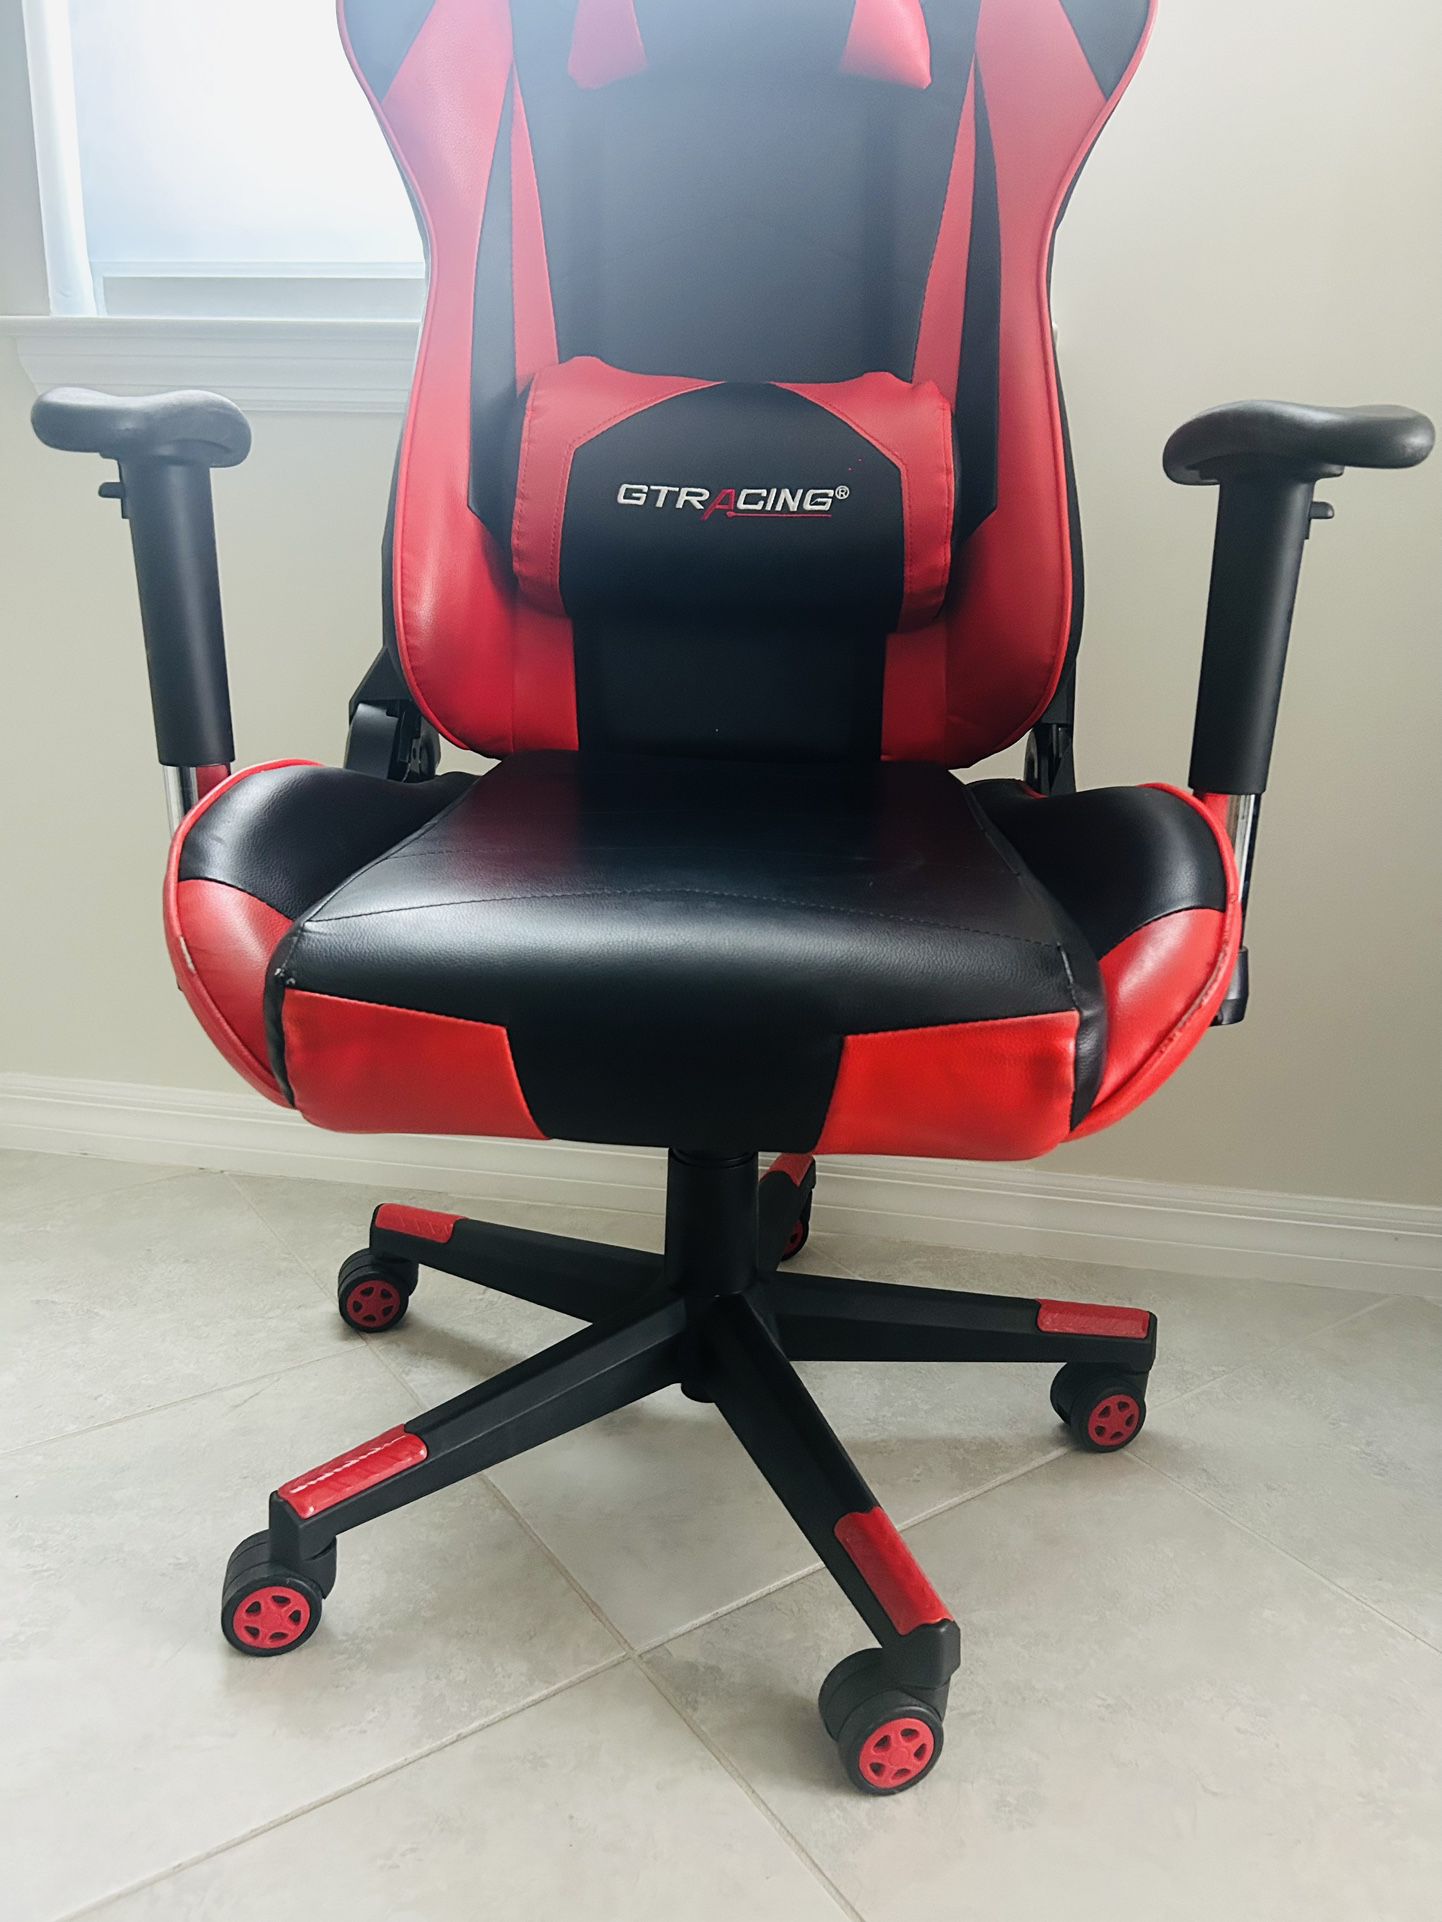 Gamimg Chair GTracing Red/black